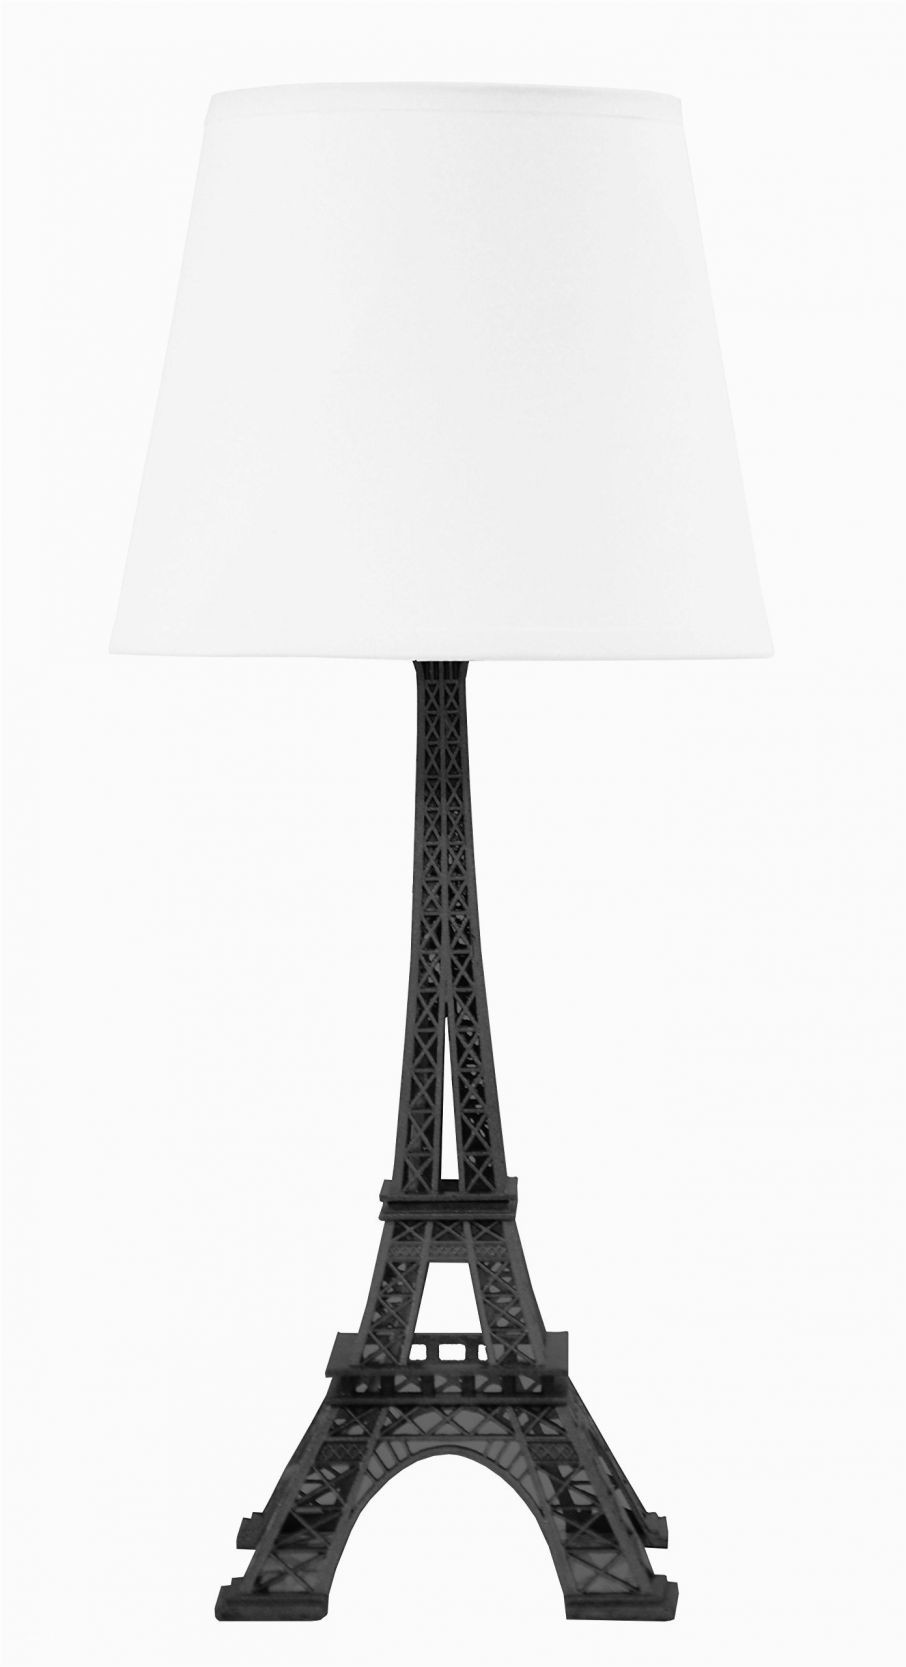 22 Stylish Black Eiffel tower Vase Centerpieces 2024 free download black eiffel tower vase centerpieces of extraordinary eiffel tower table lamp unique amazon yj gwl soft in extraordinary eiffel tower table lamp unique amazon yj gwl soft shaggy area rugs an